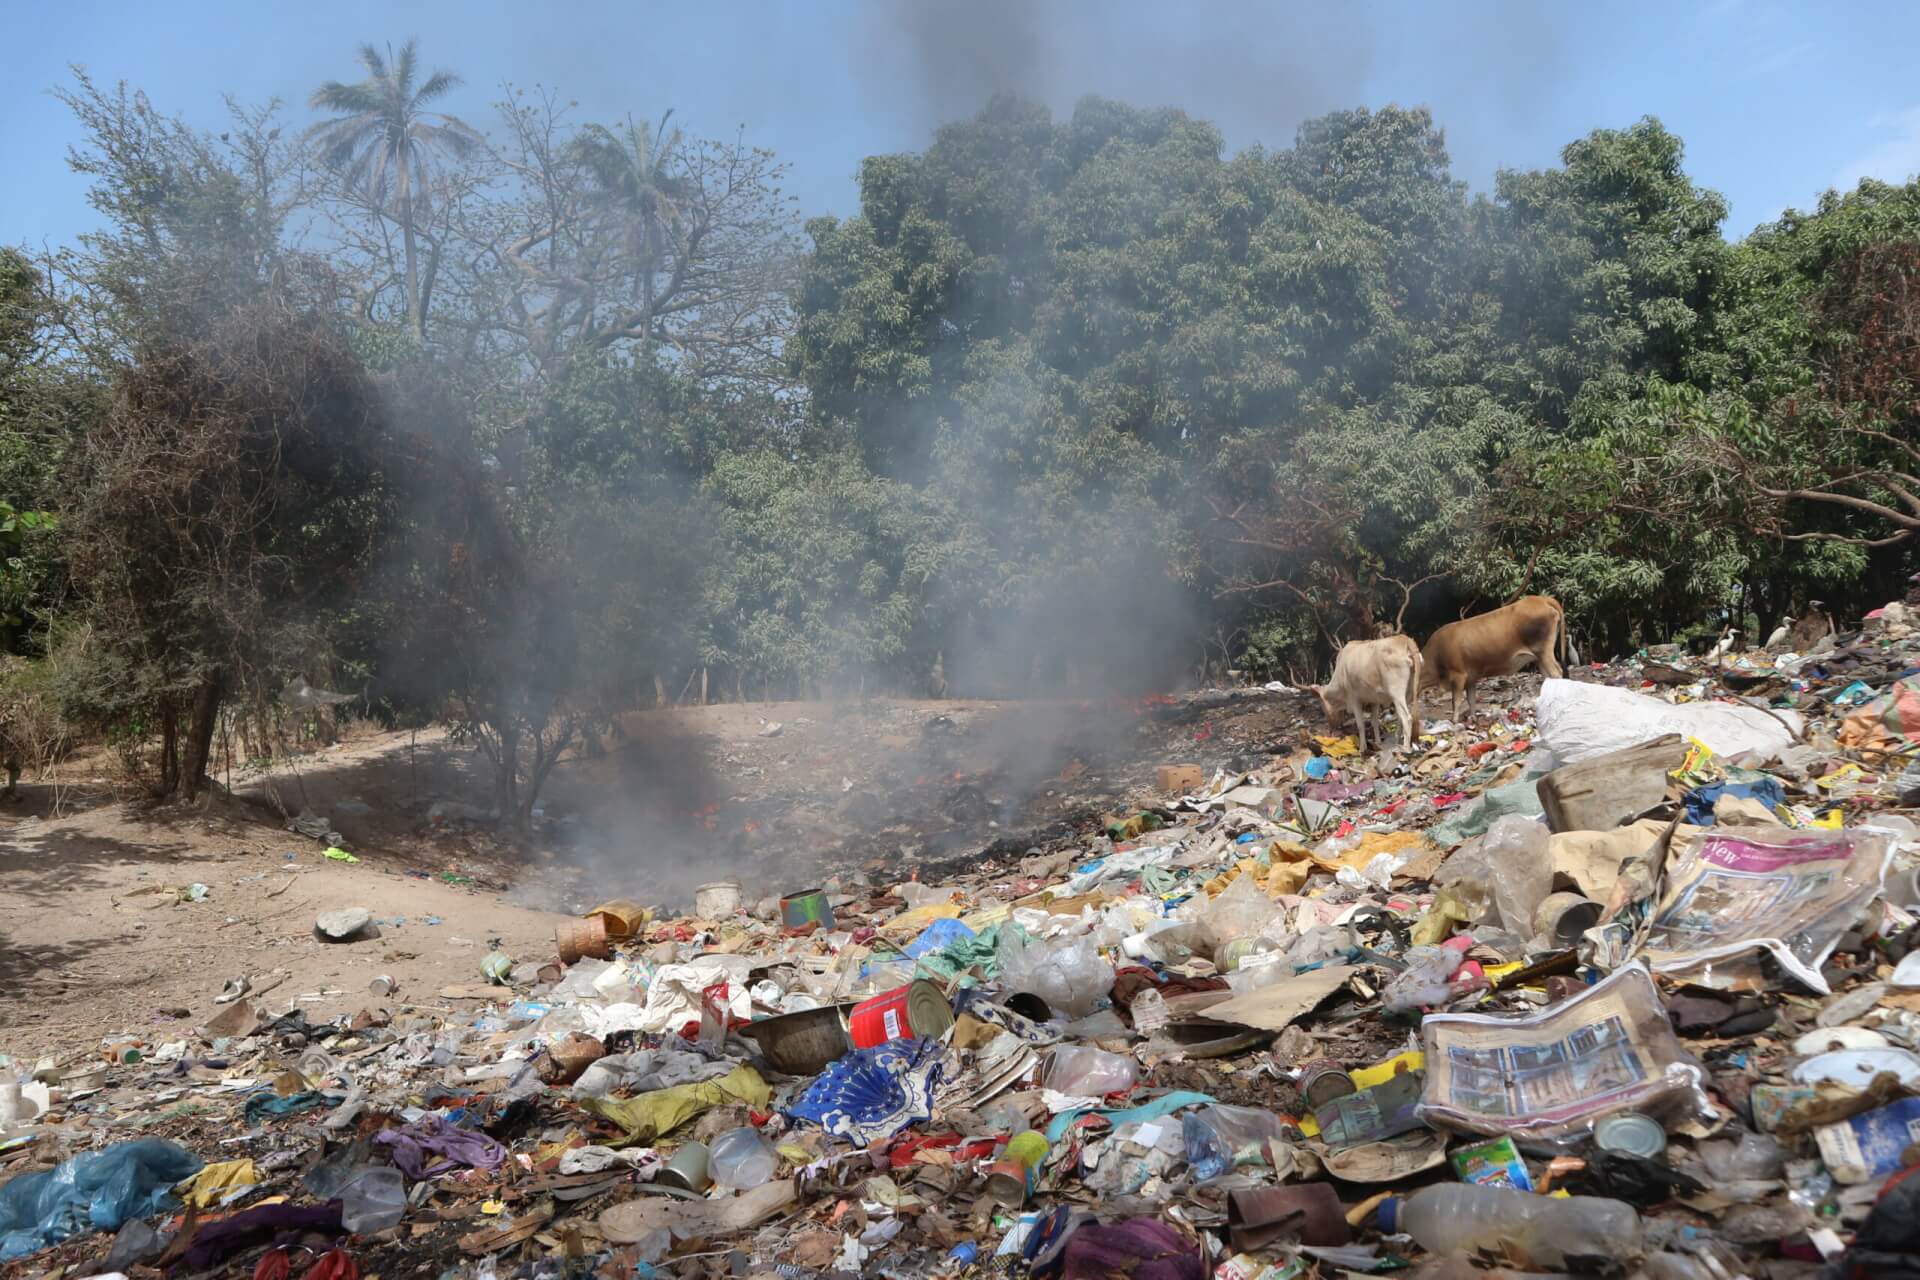 Informal waste dump in The Gambia with open burning